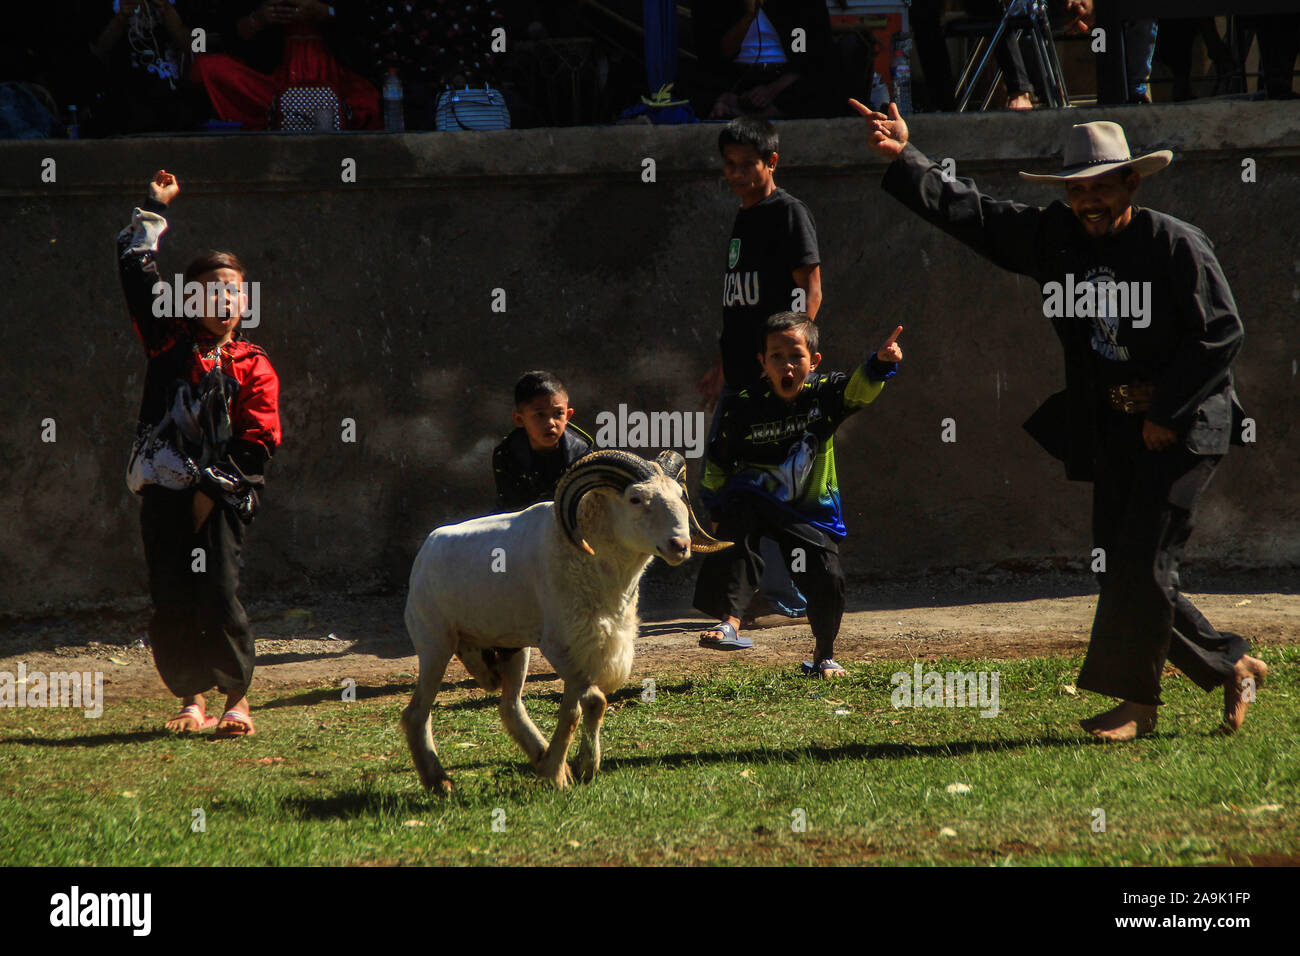 Kids chant slogans during the competition.In Garut culture, fighting sheep is part the art of dexterity which is tradition. Garut sheep have special characteristics as sheep for agile fighting. Like most animals for raising garut sheep requires special treatment. Garut sheep have a more muscular physique than sheep in general average weight is 60Kg - 80Kg with strong and circular horn. Stock Photo